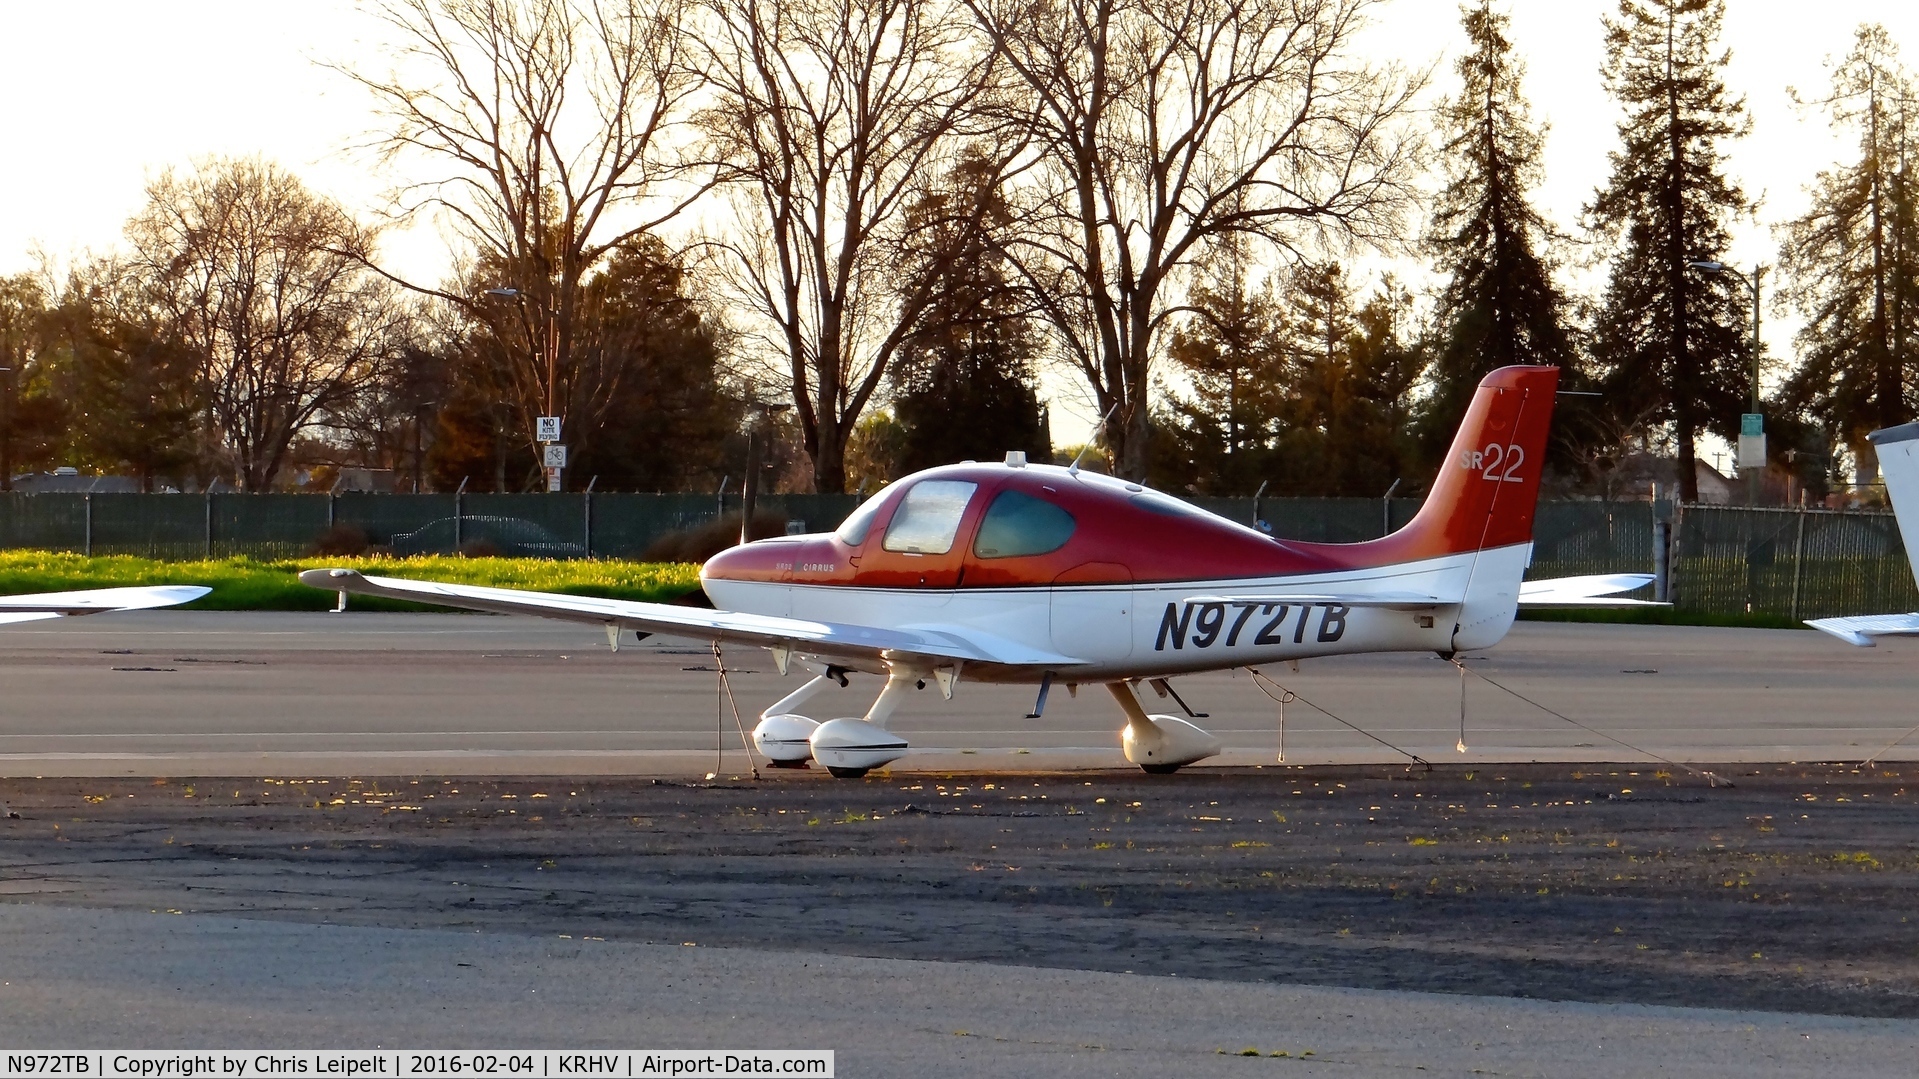 N972TB, Cirrus SR22 C/N 3778, First Class Technologies (Portland, OR) 2011 Cirrus SR22 parked at a temporary tie down (one month) at Reid Hillview Airport, San Jose, CA.